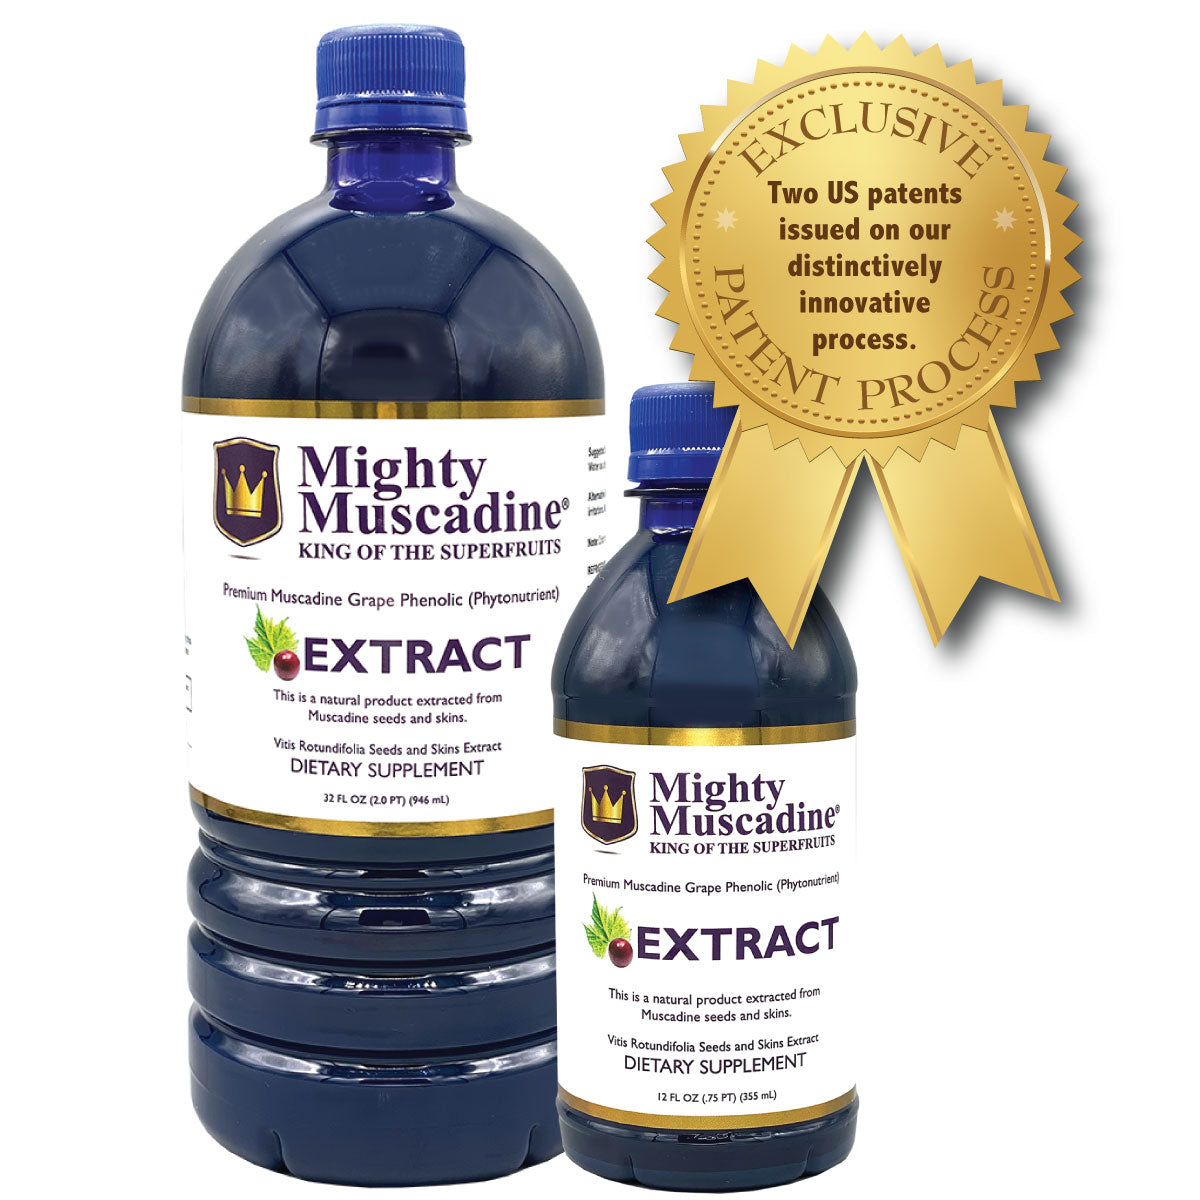 Mighty Muscadine® Grape Seeds and Skins Extract